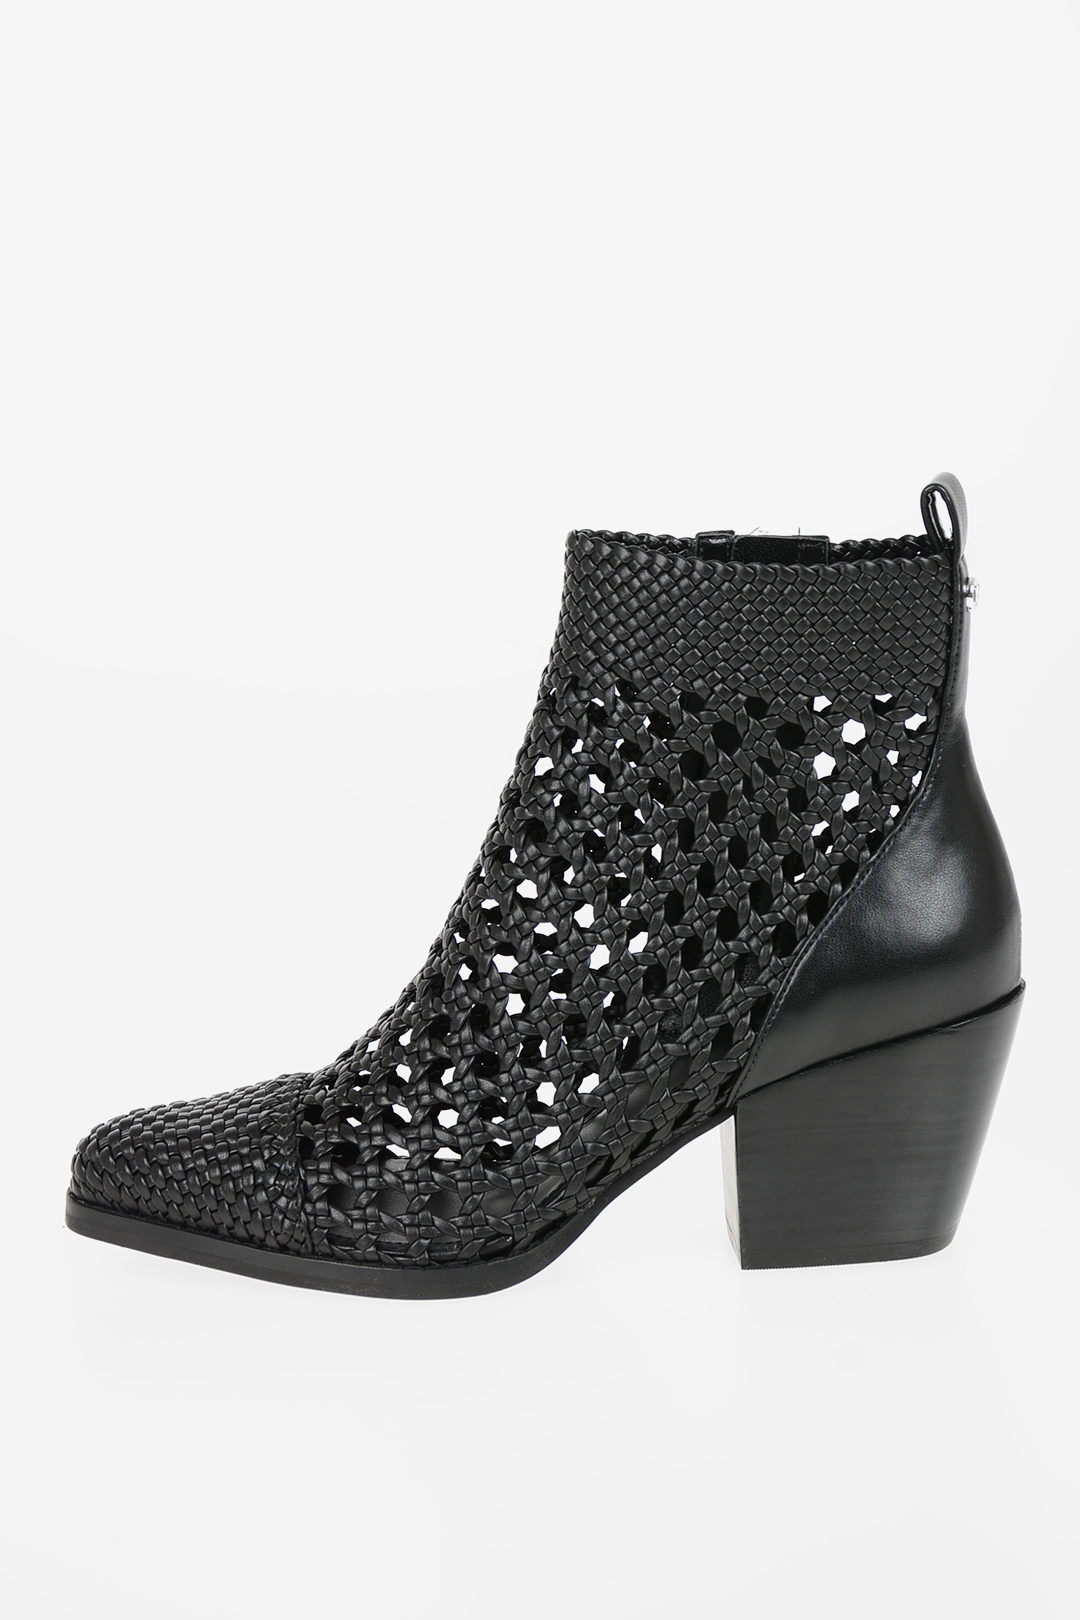 Michael Kors MICHAEL Openwork AUGUSTINE Ankle Boot women - Glamood Outlet